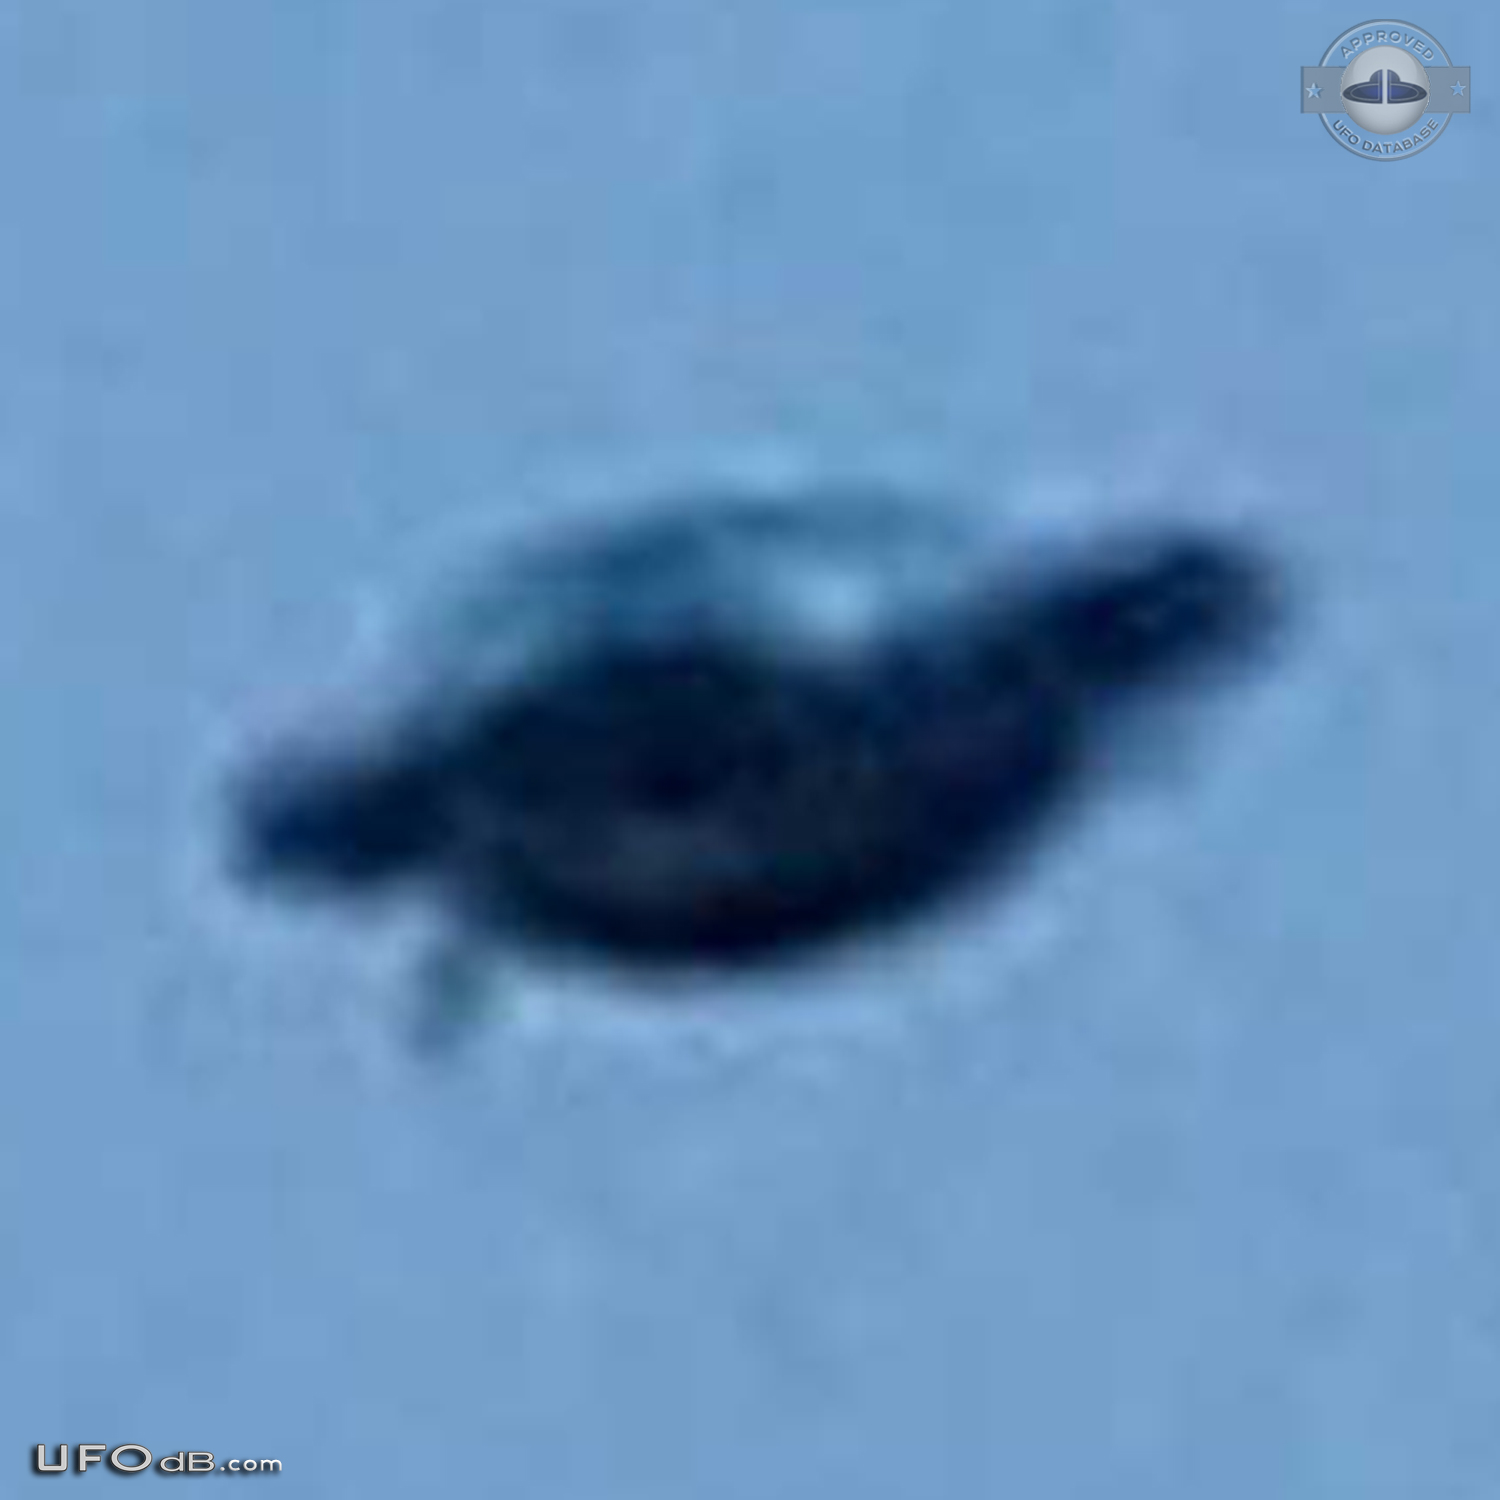 Father and Son in Zagreb, Croatia sees UFO and get picture - 2006 UFO Picture #441-3